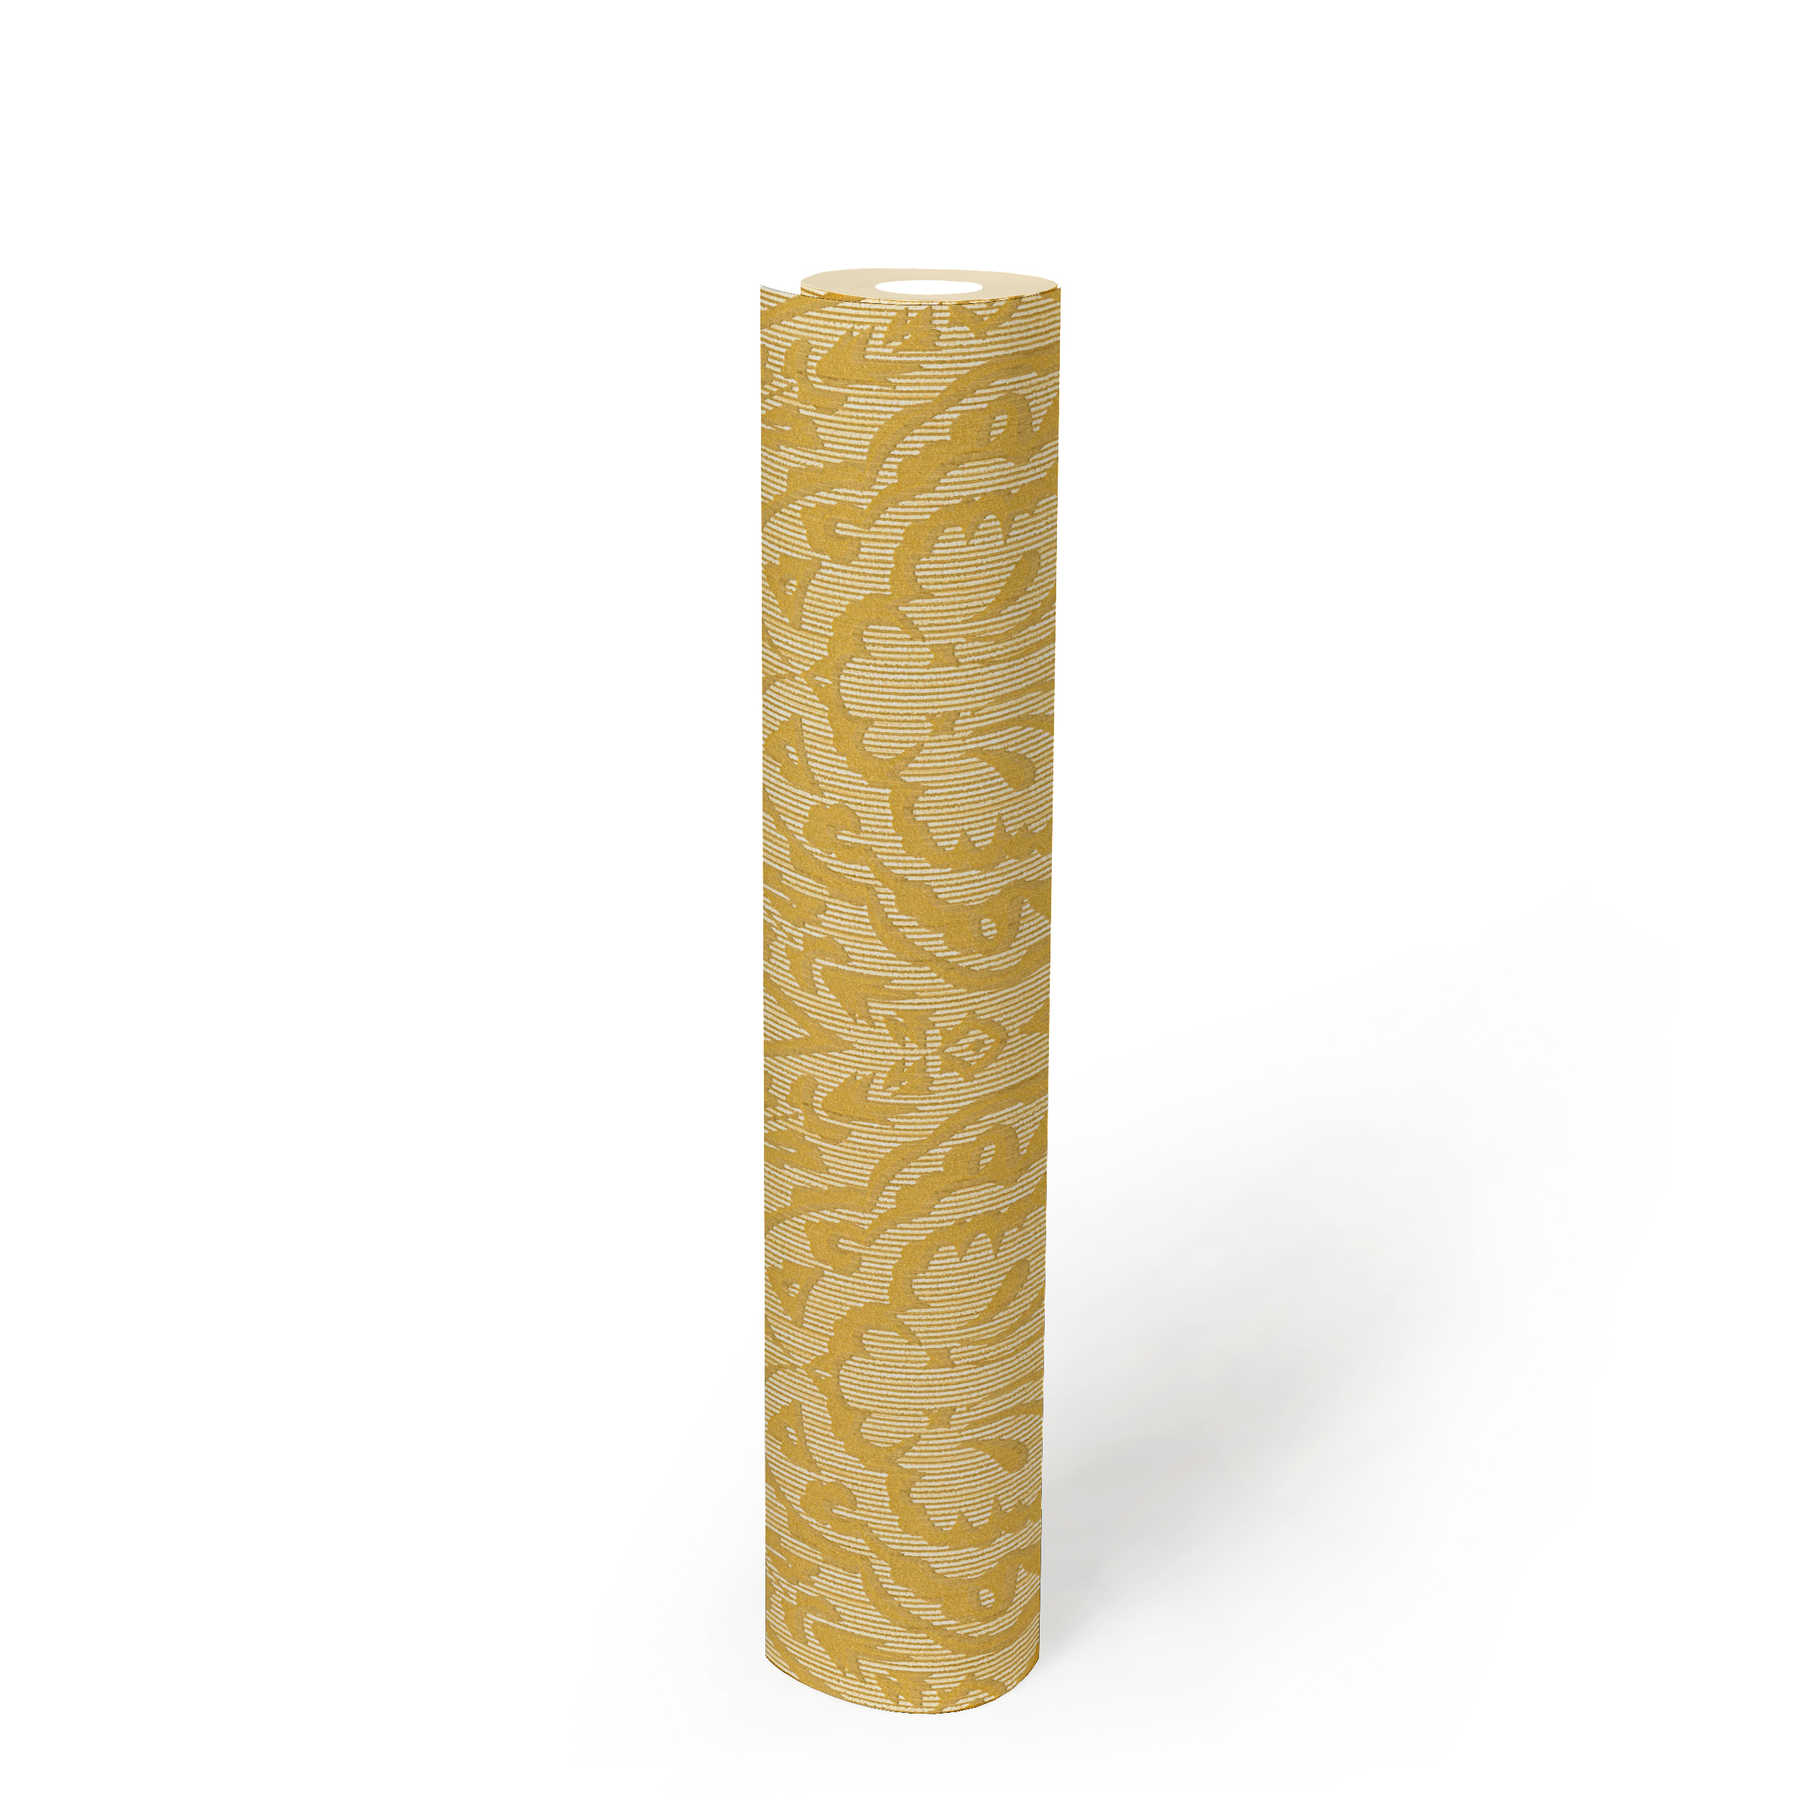             Non-woven wallpaper with structure design & ornamental pattern - yellow
        